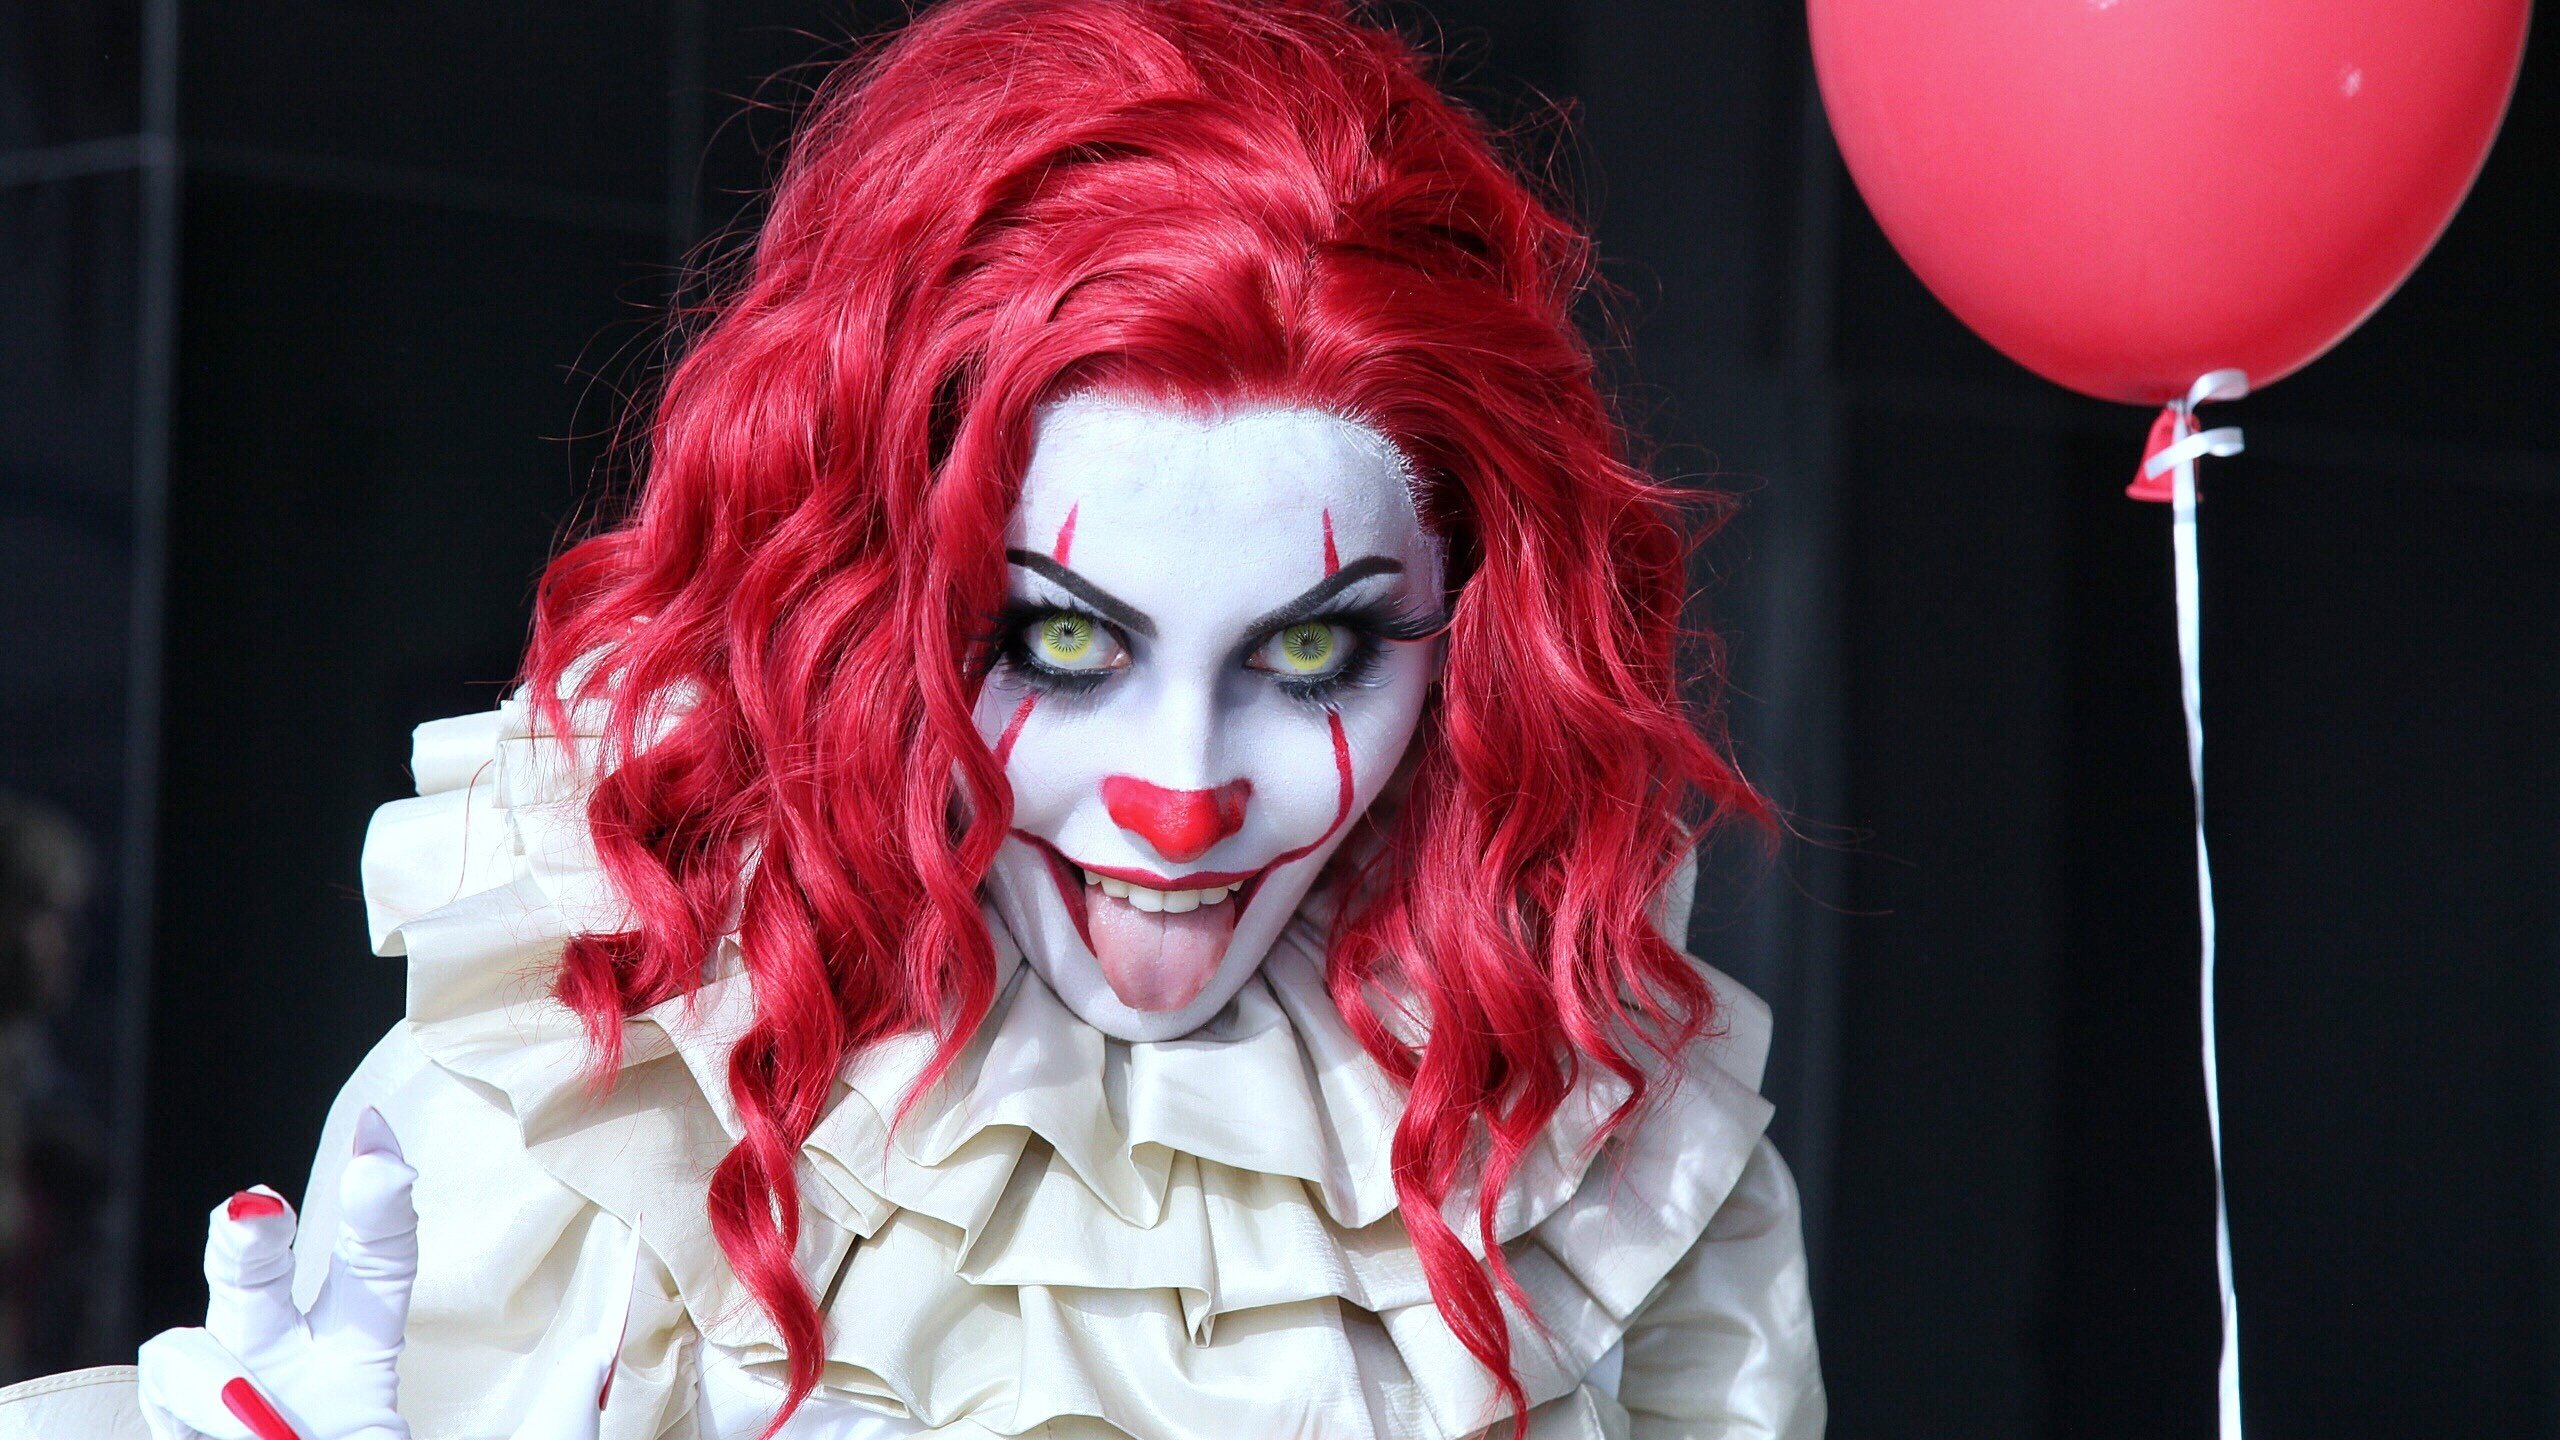 Image Horrible Redhead girl cosplayers clowns Pennywise 2560x1440